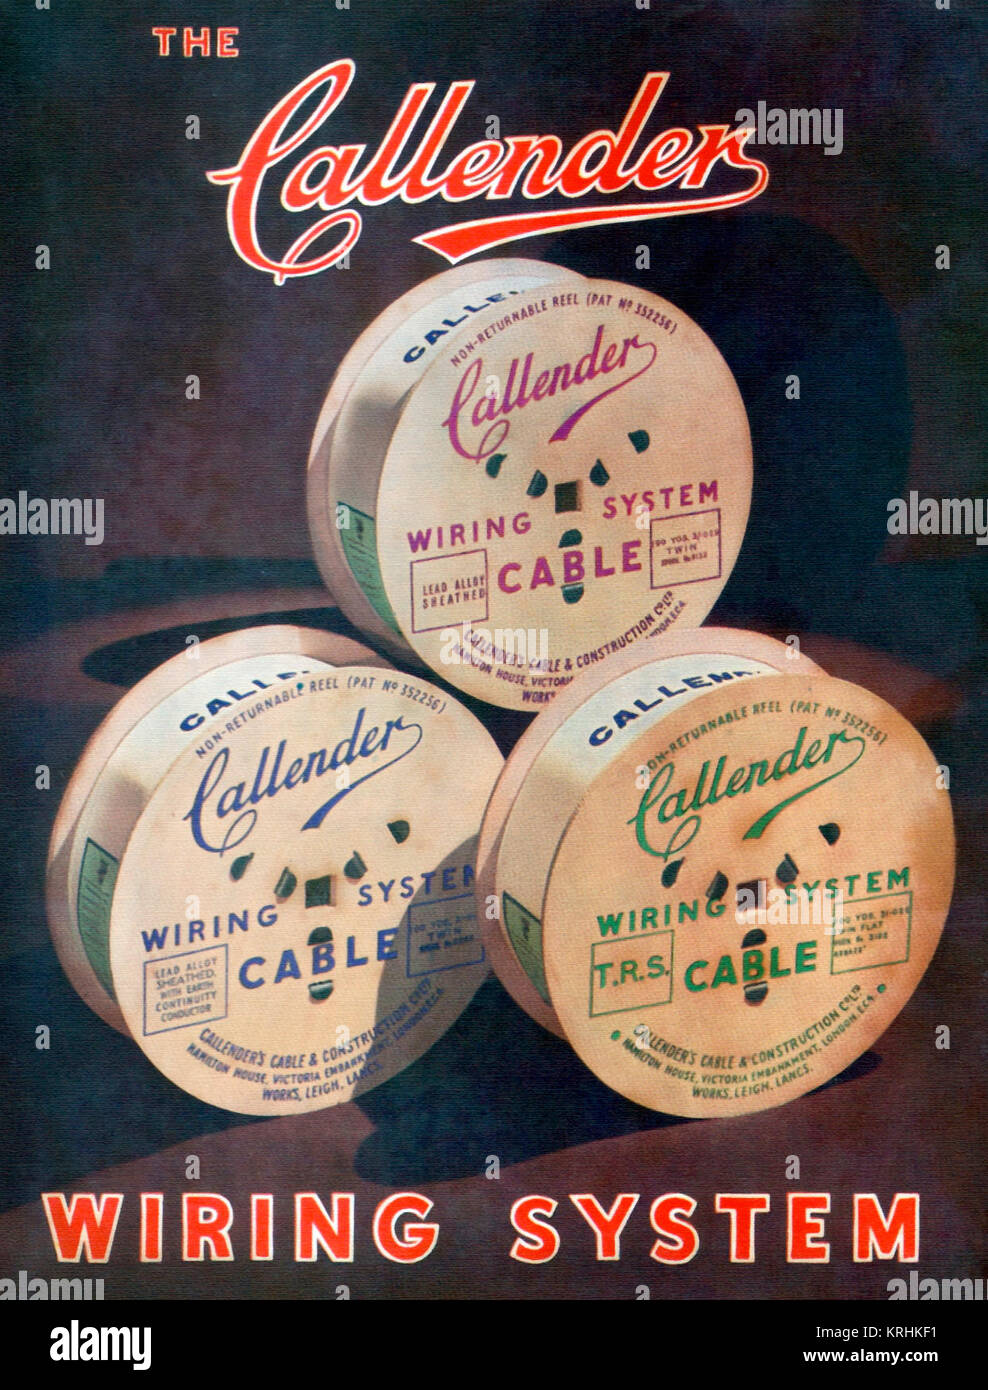 Callender Wiring System - brochure cover 1938 Stock Photo